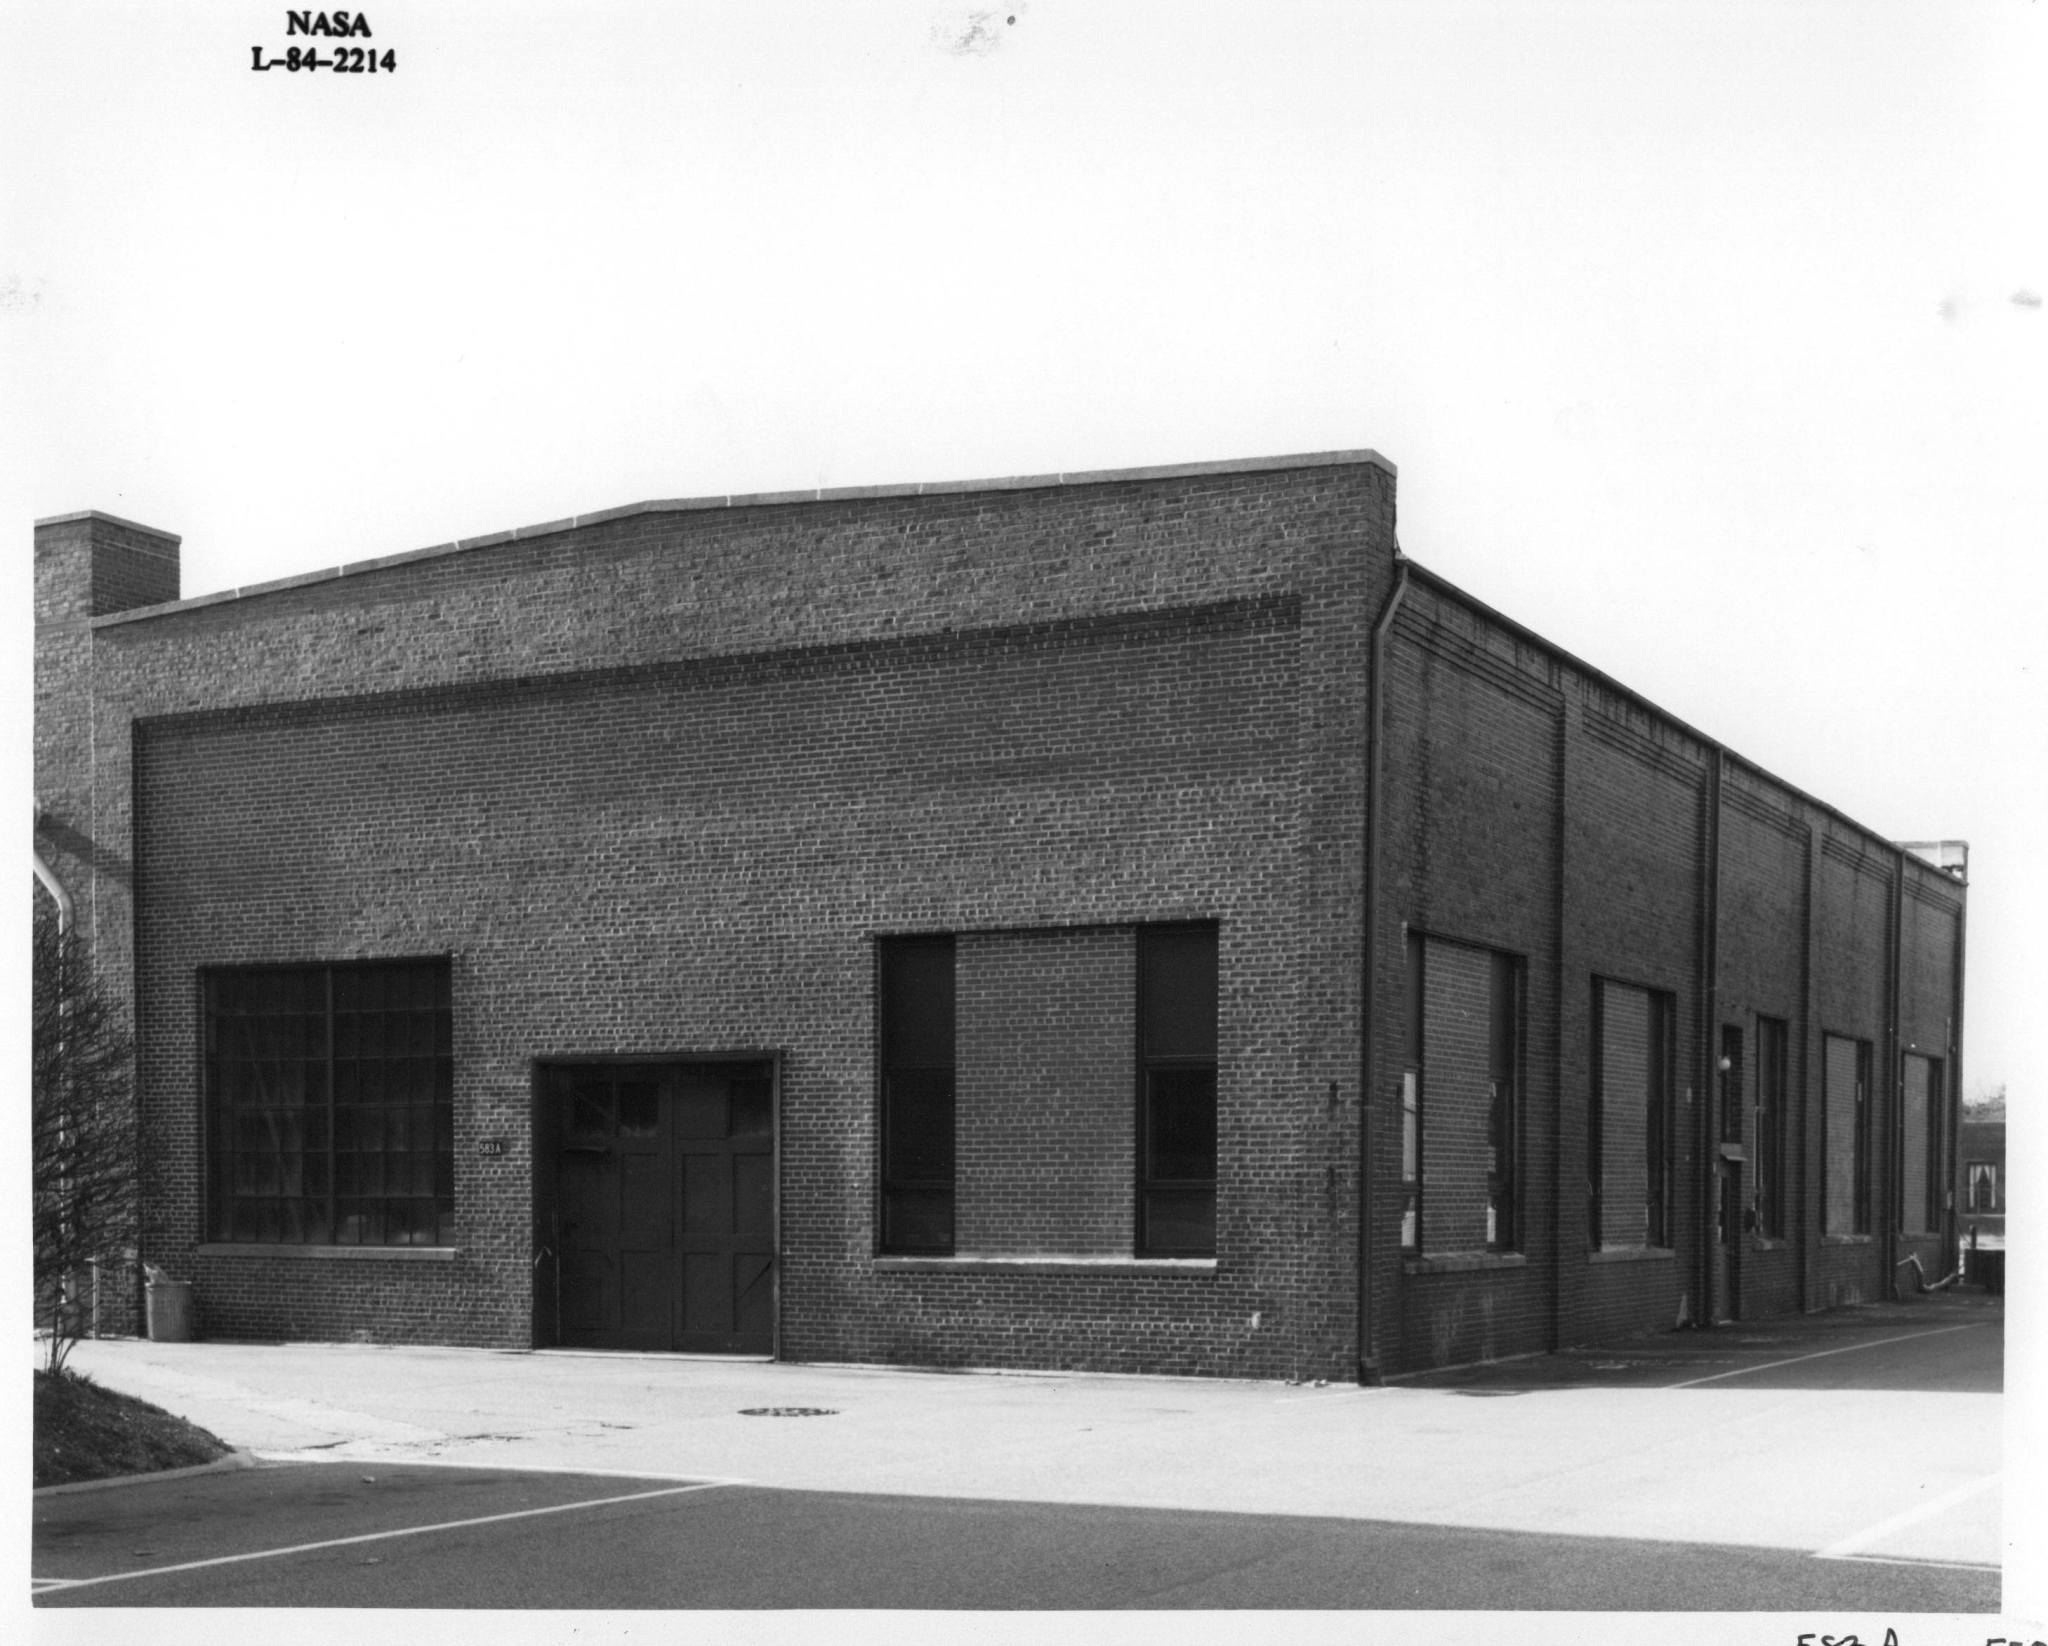 The exterior of Building 583A after one of its windows was renovated in 1984.